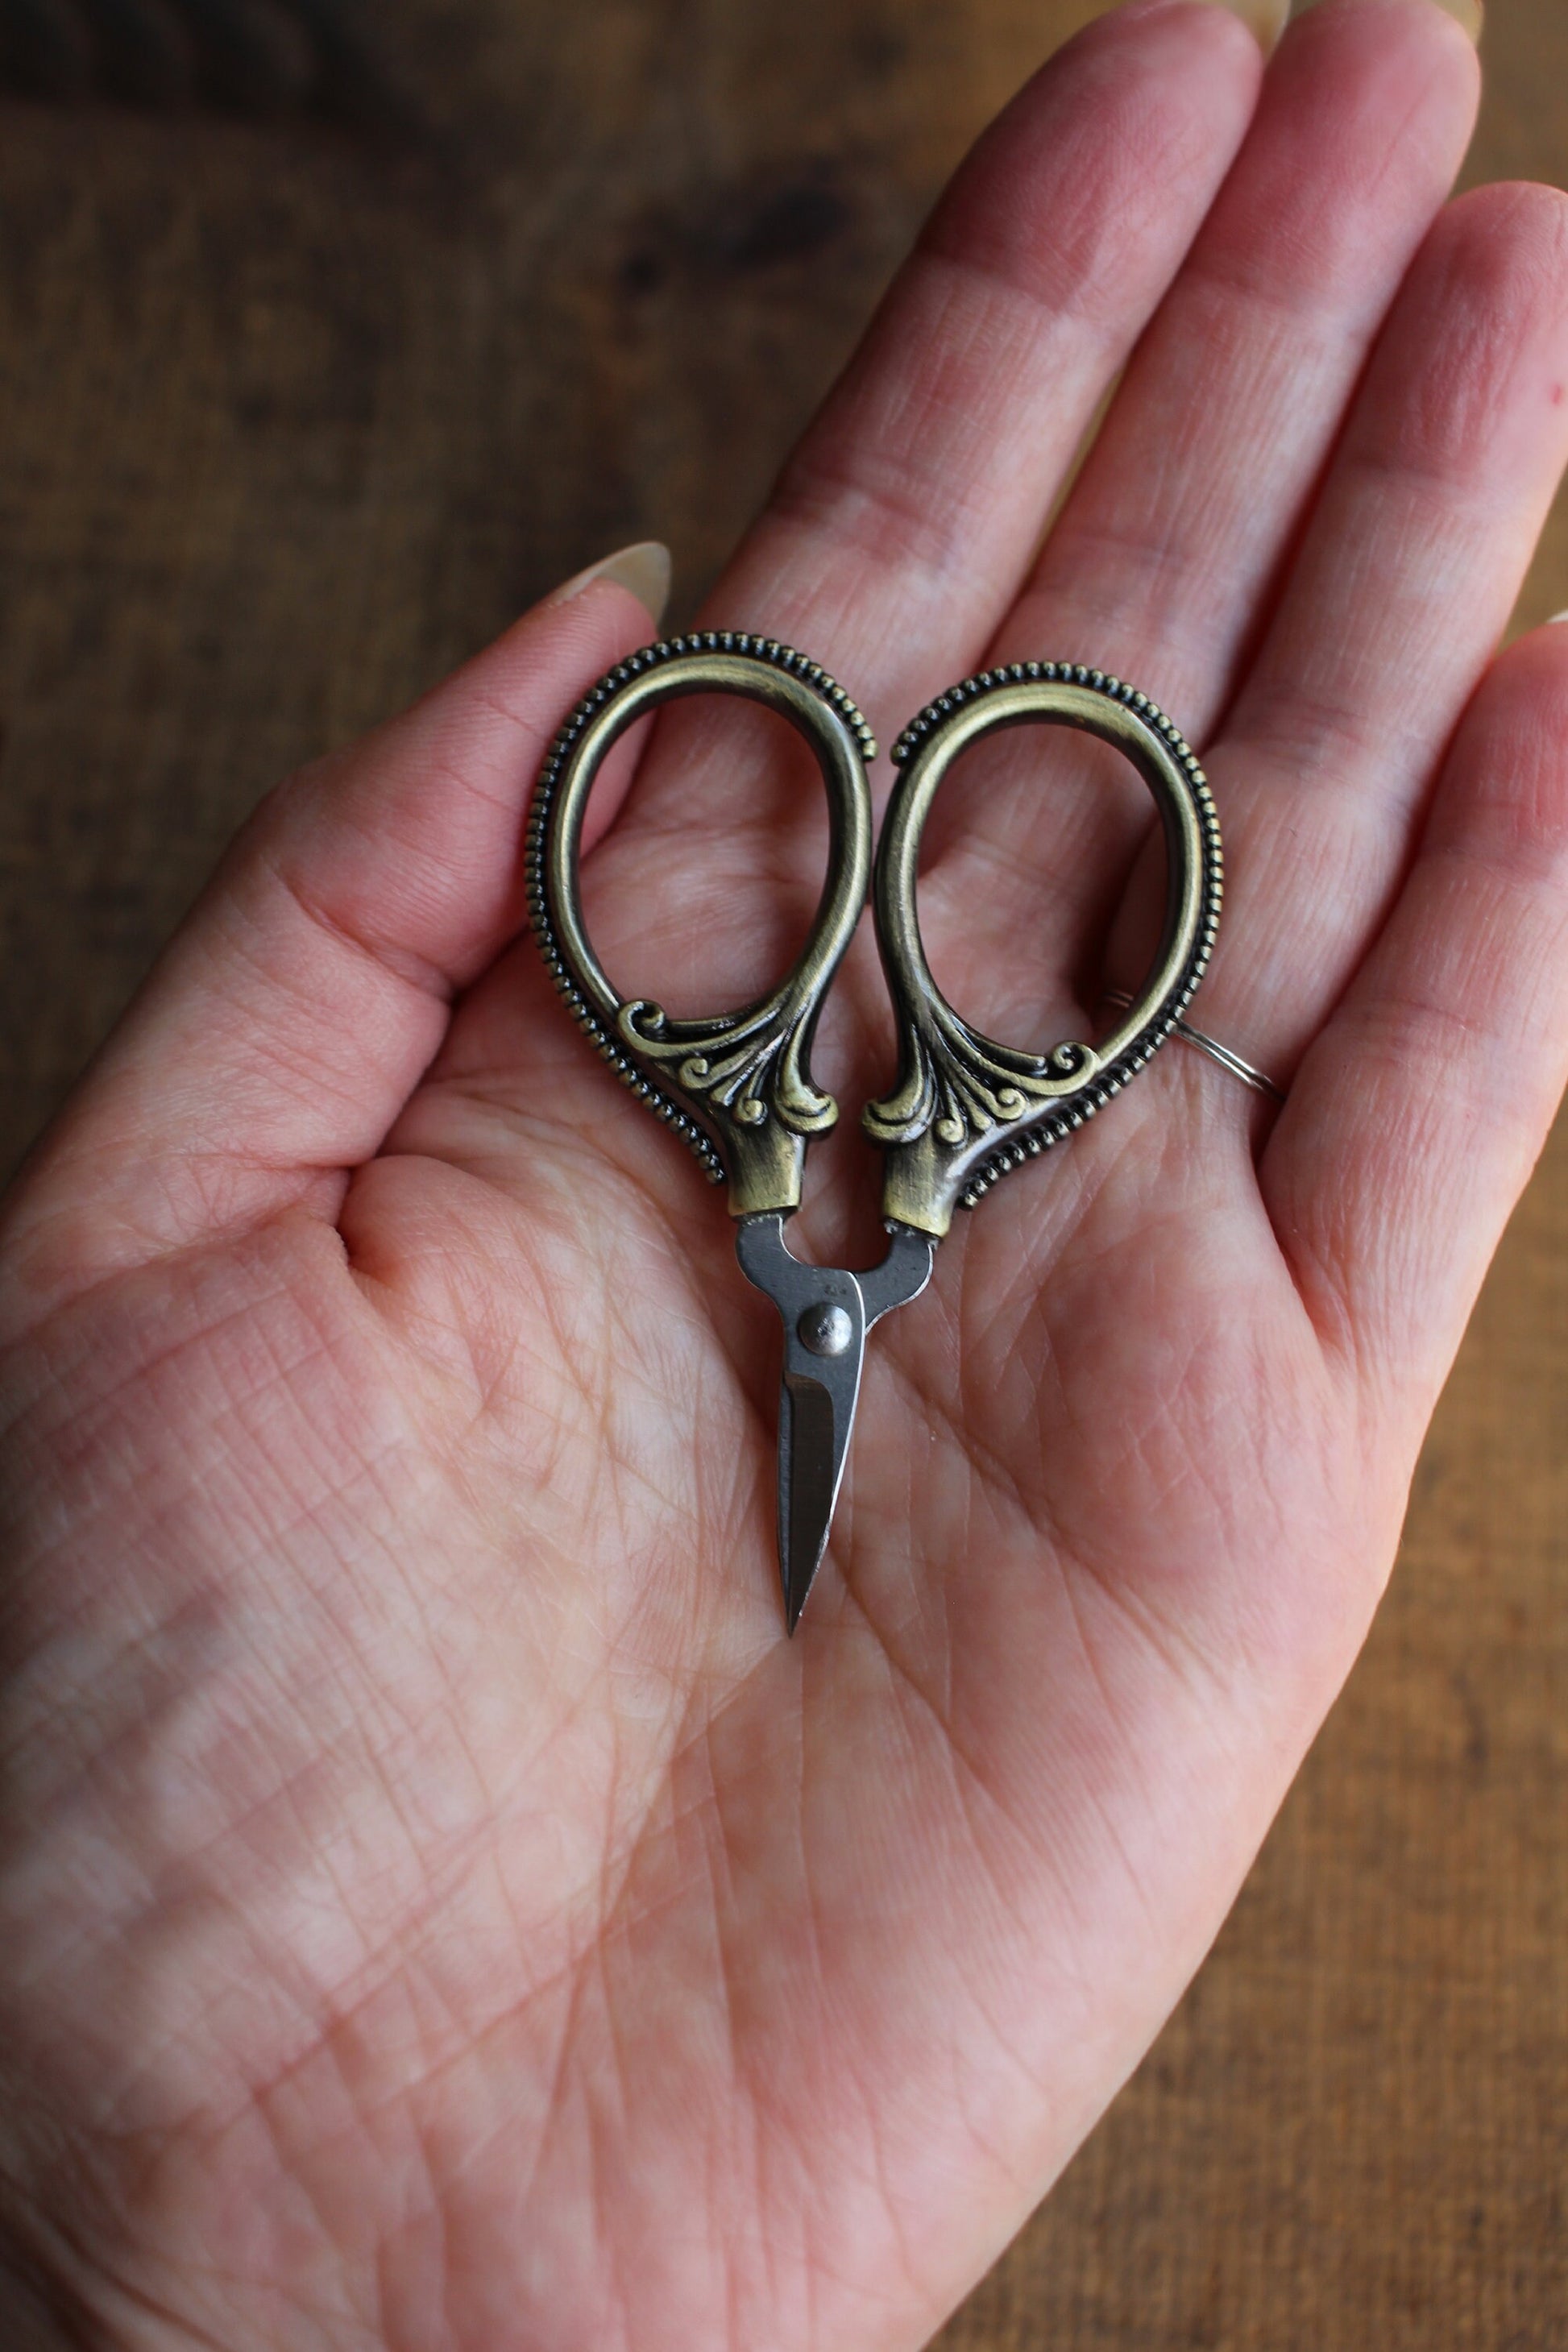 Small Storkette Embroidery Scissors – Snuggly Monkey